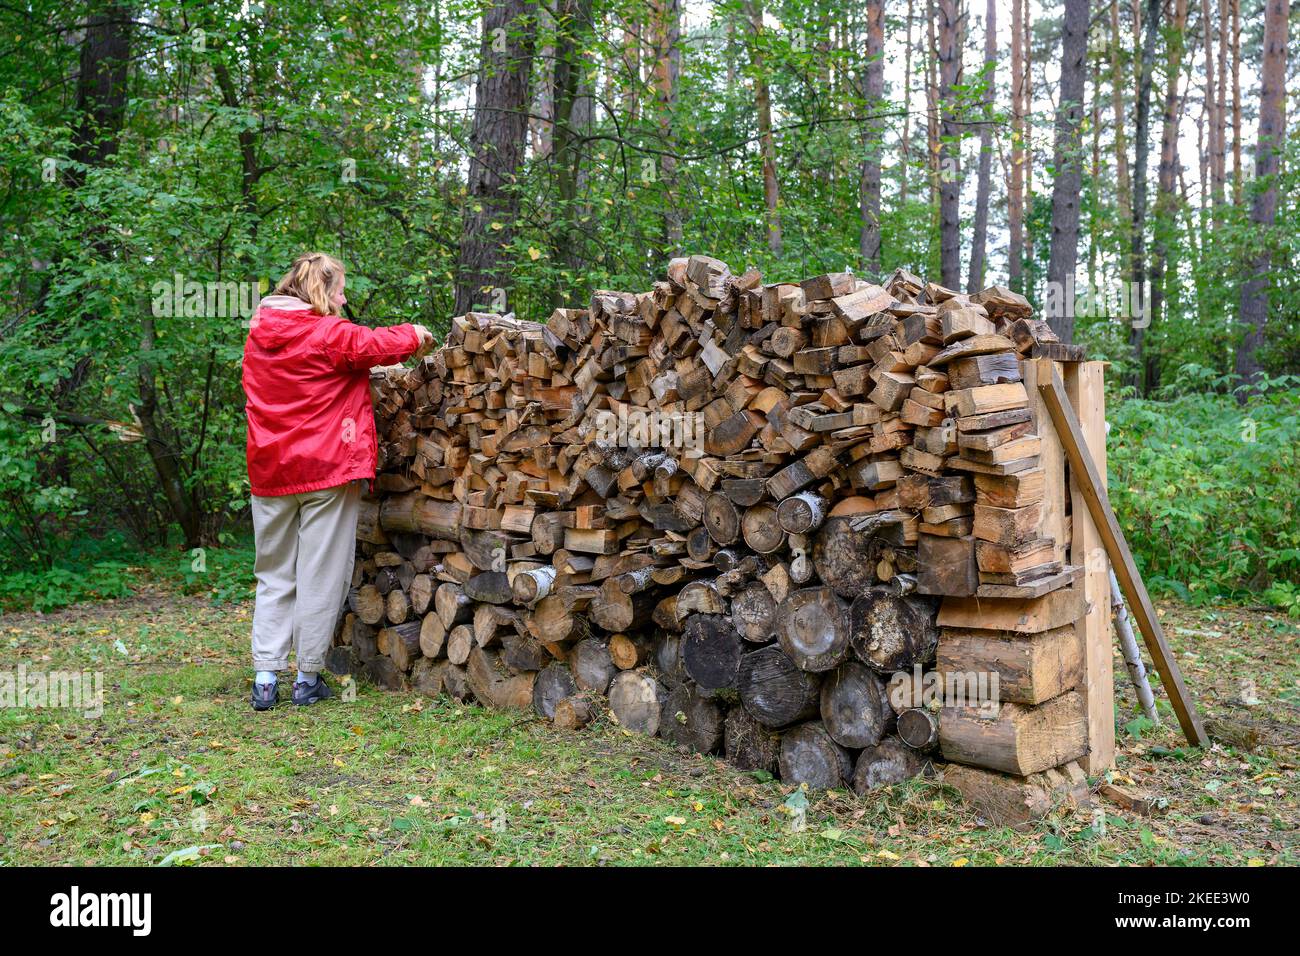 A European woman next to a woodpile in a clearing among trees in autumn Stock Photo